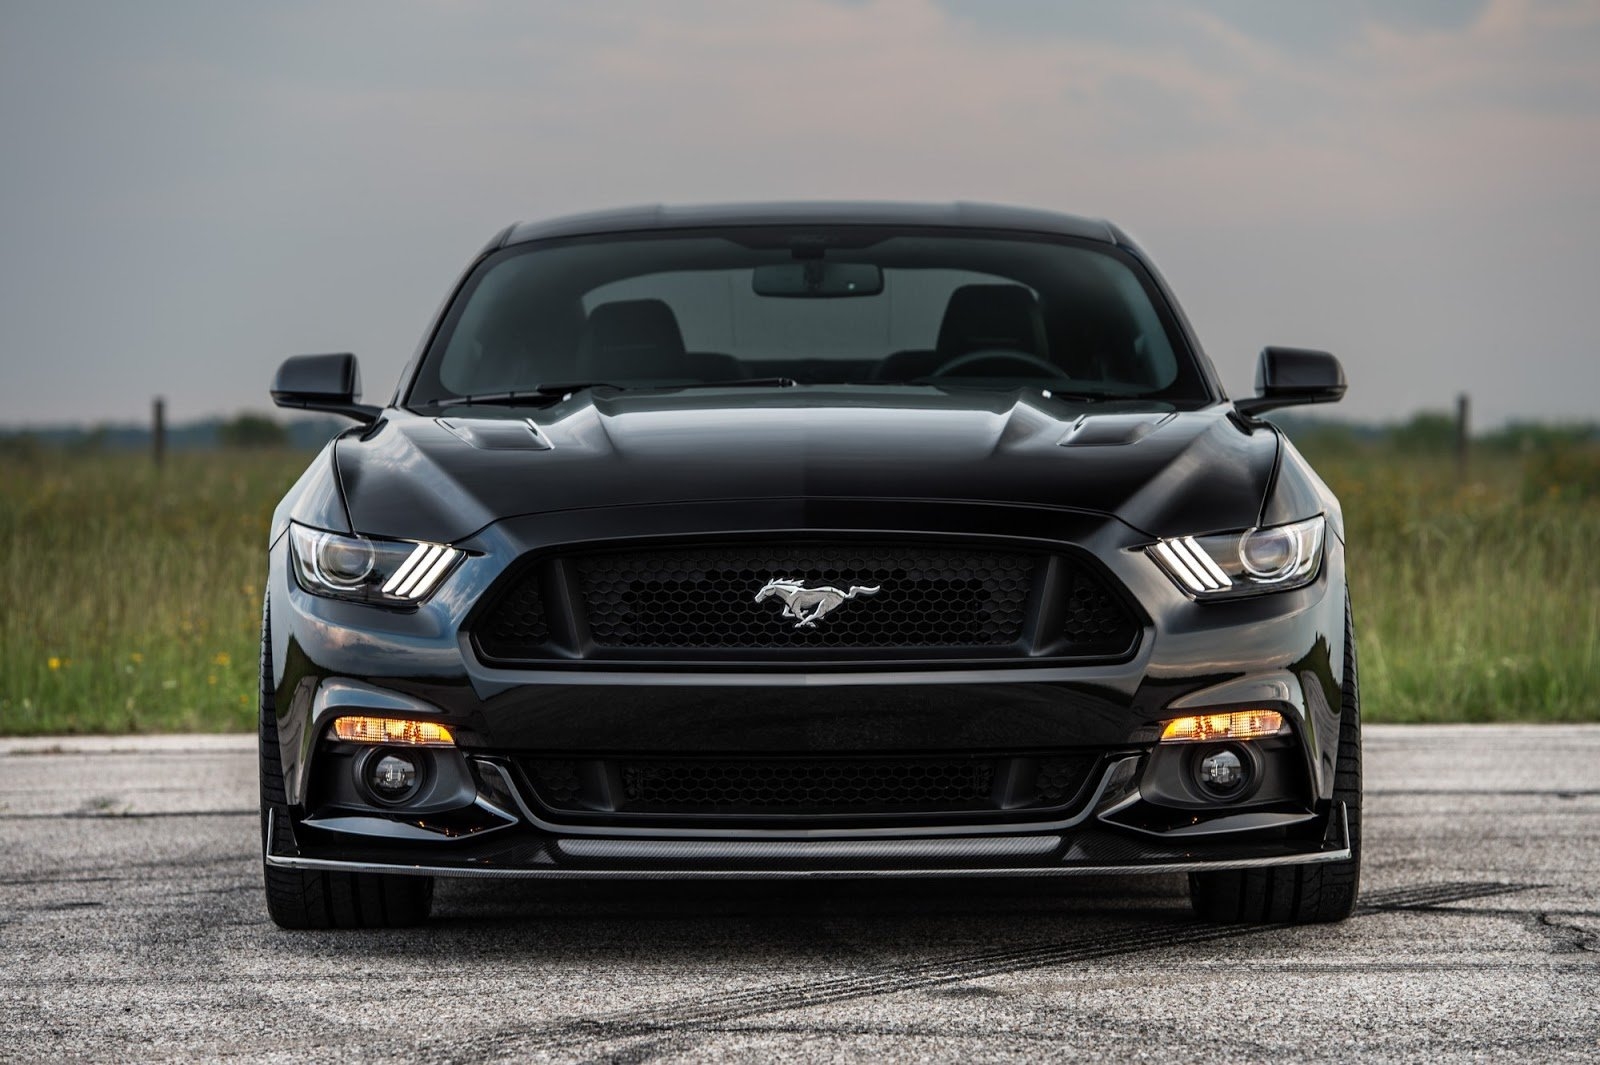 Ford Mustang Black Wallpapers